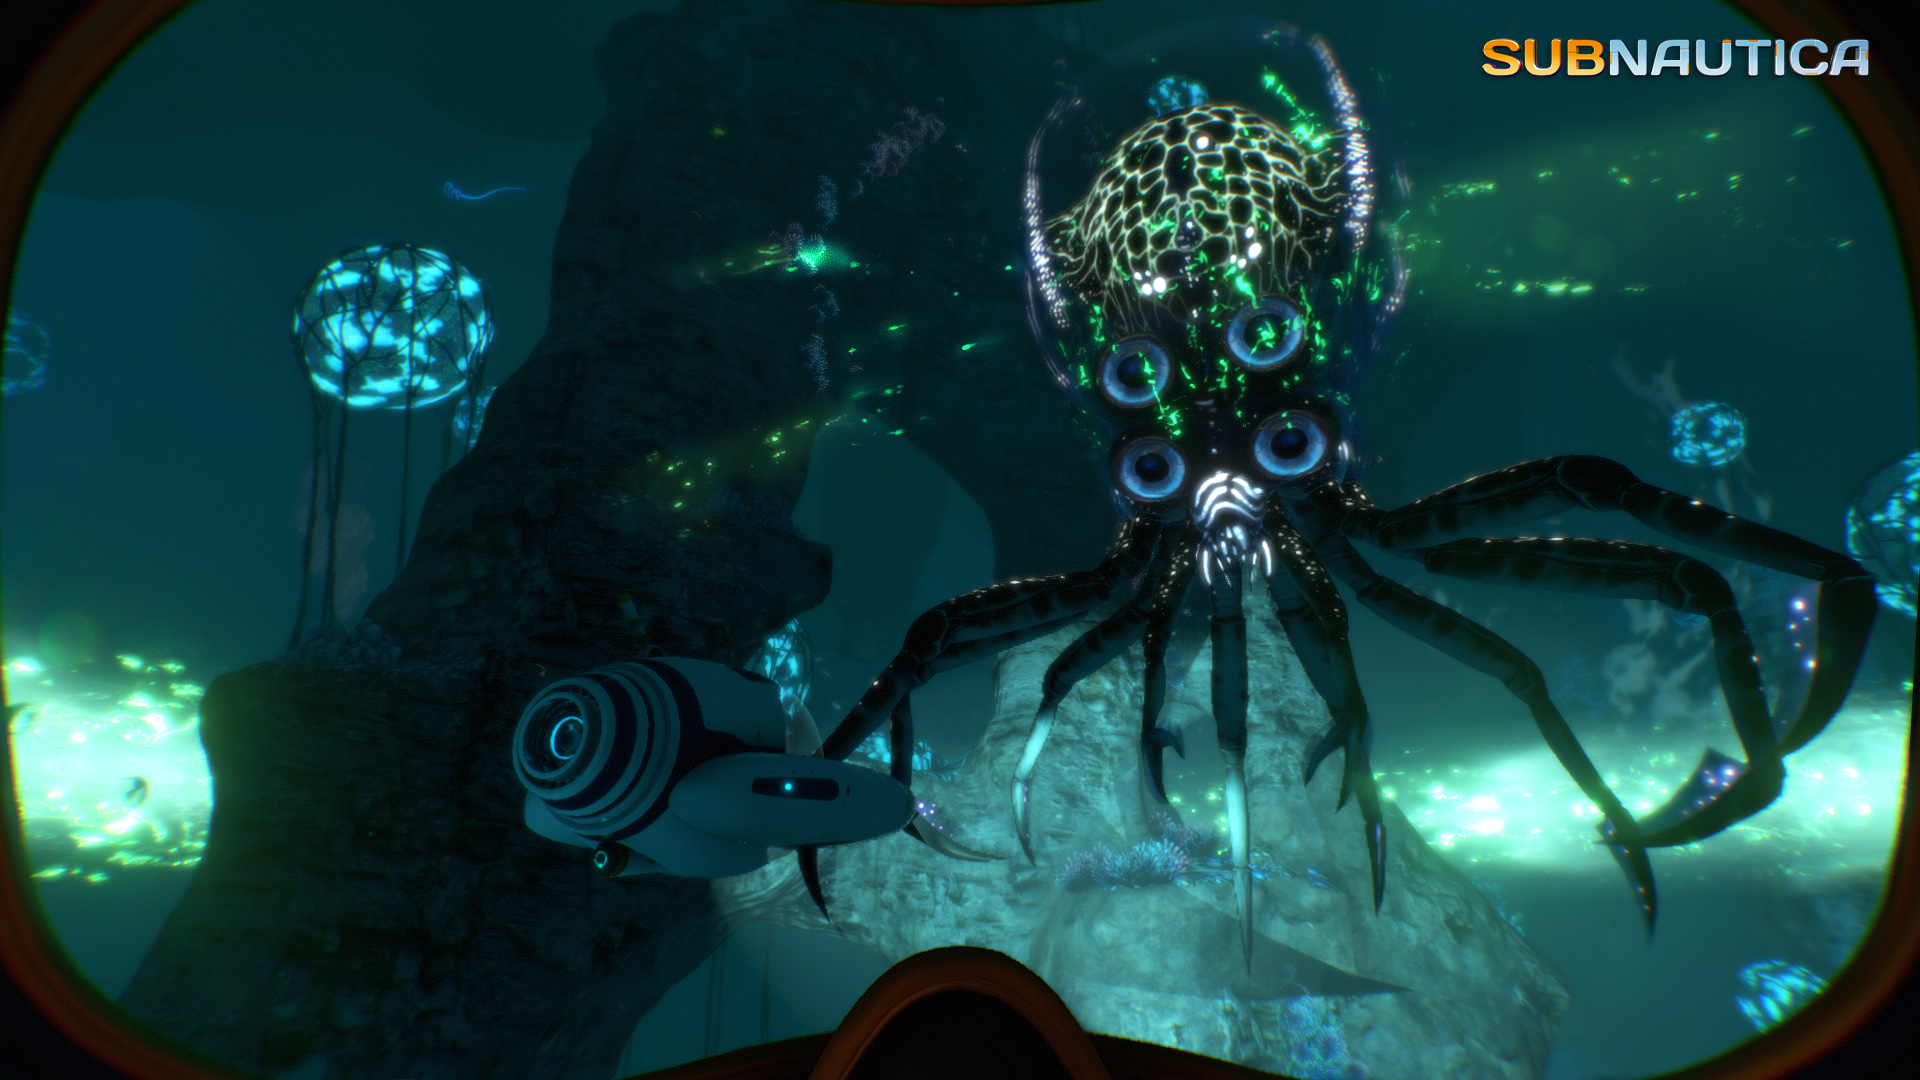 Subnautica Free Download for PC